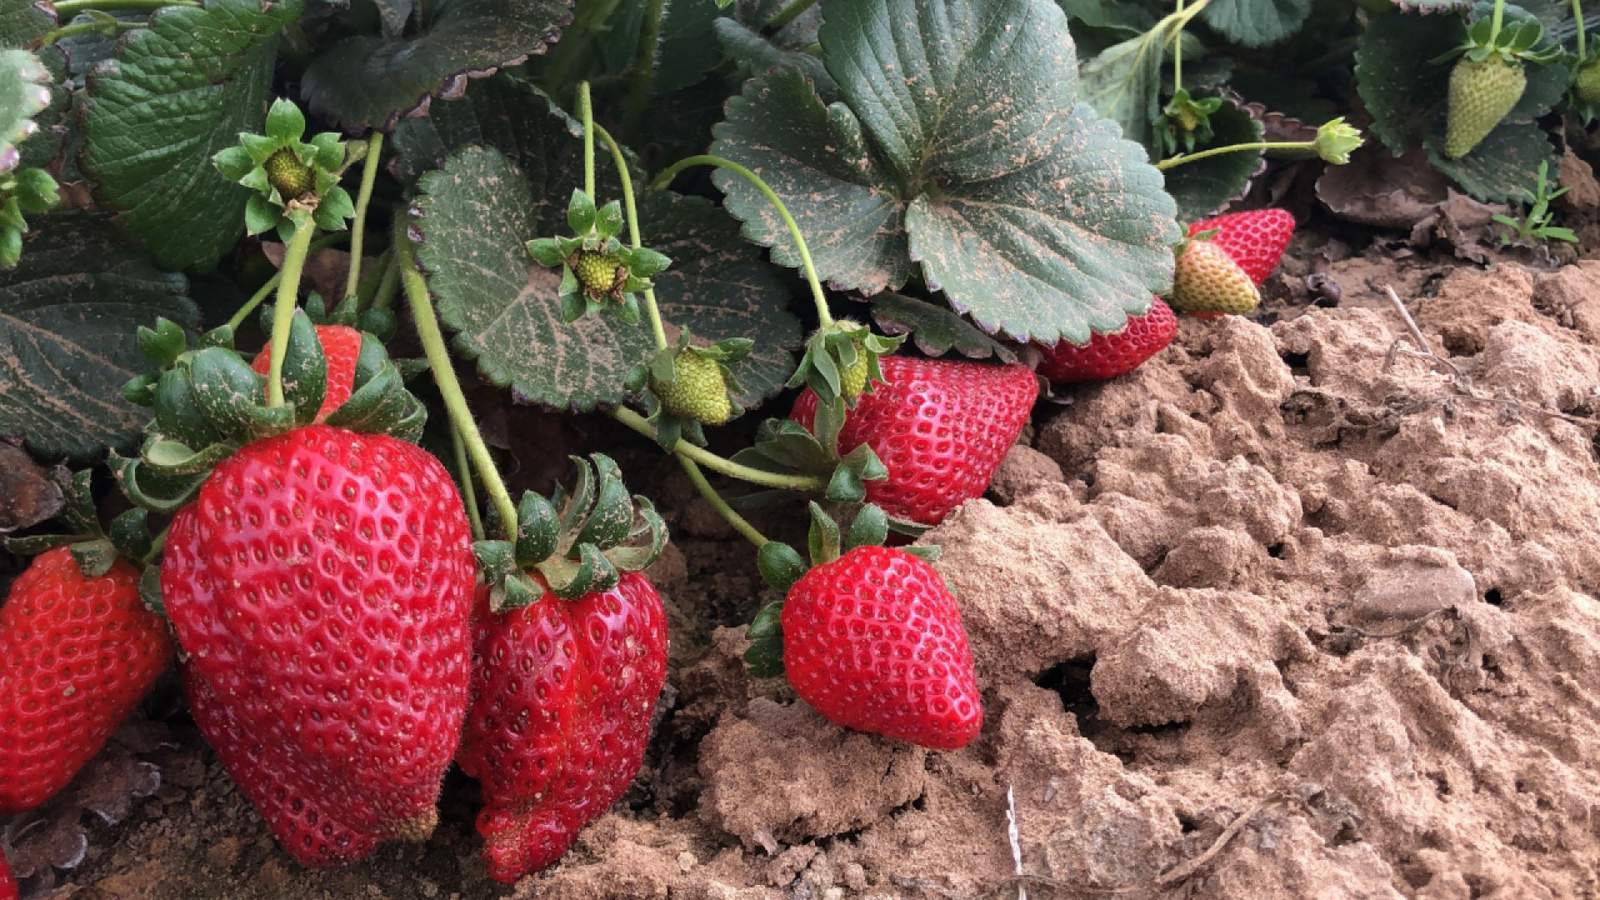 What has the last year been like for strawberry growers in Poteet?